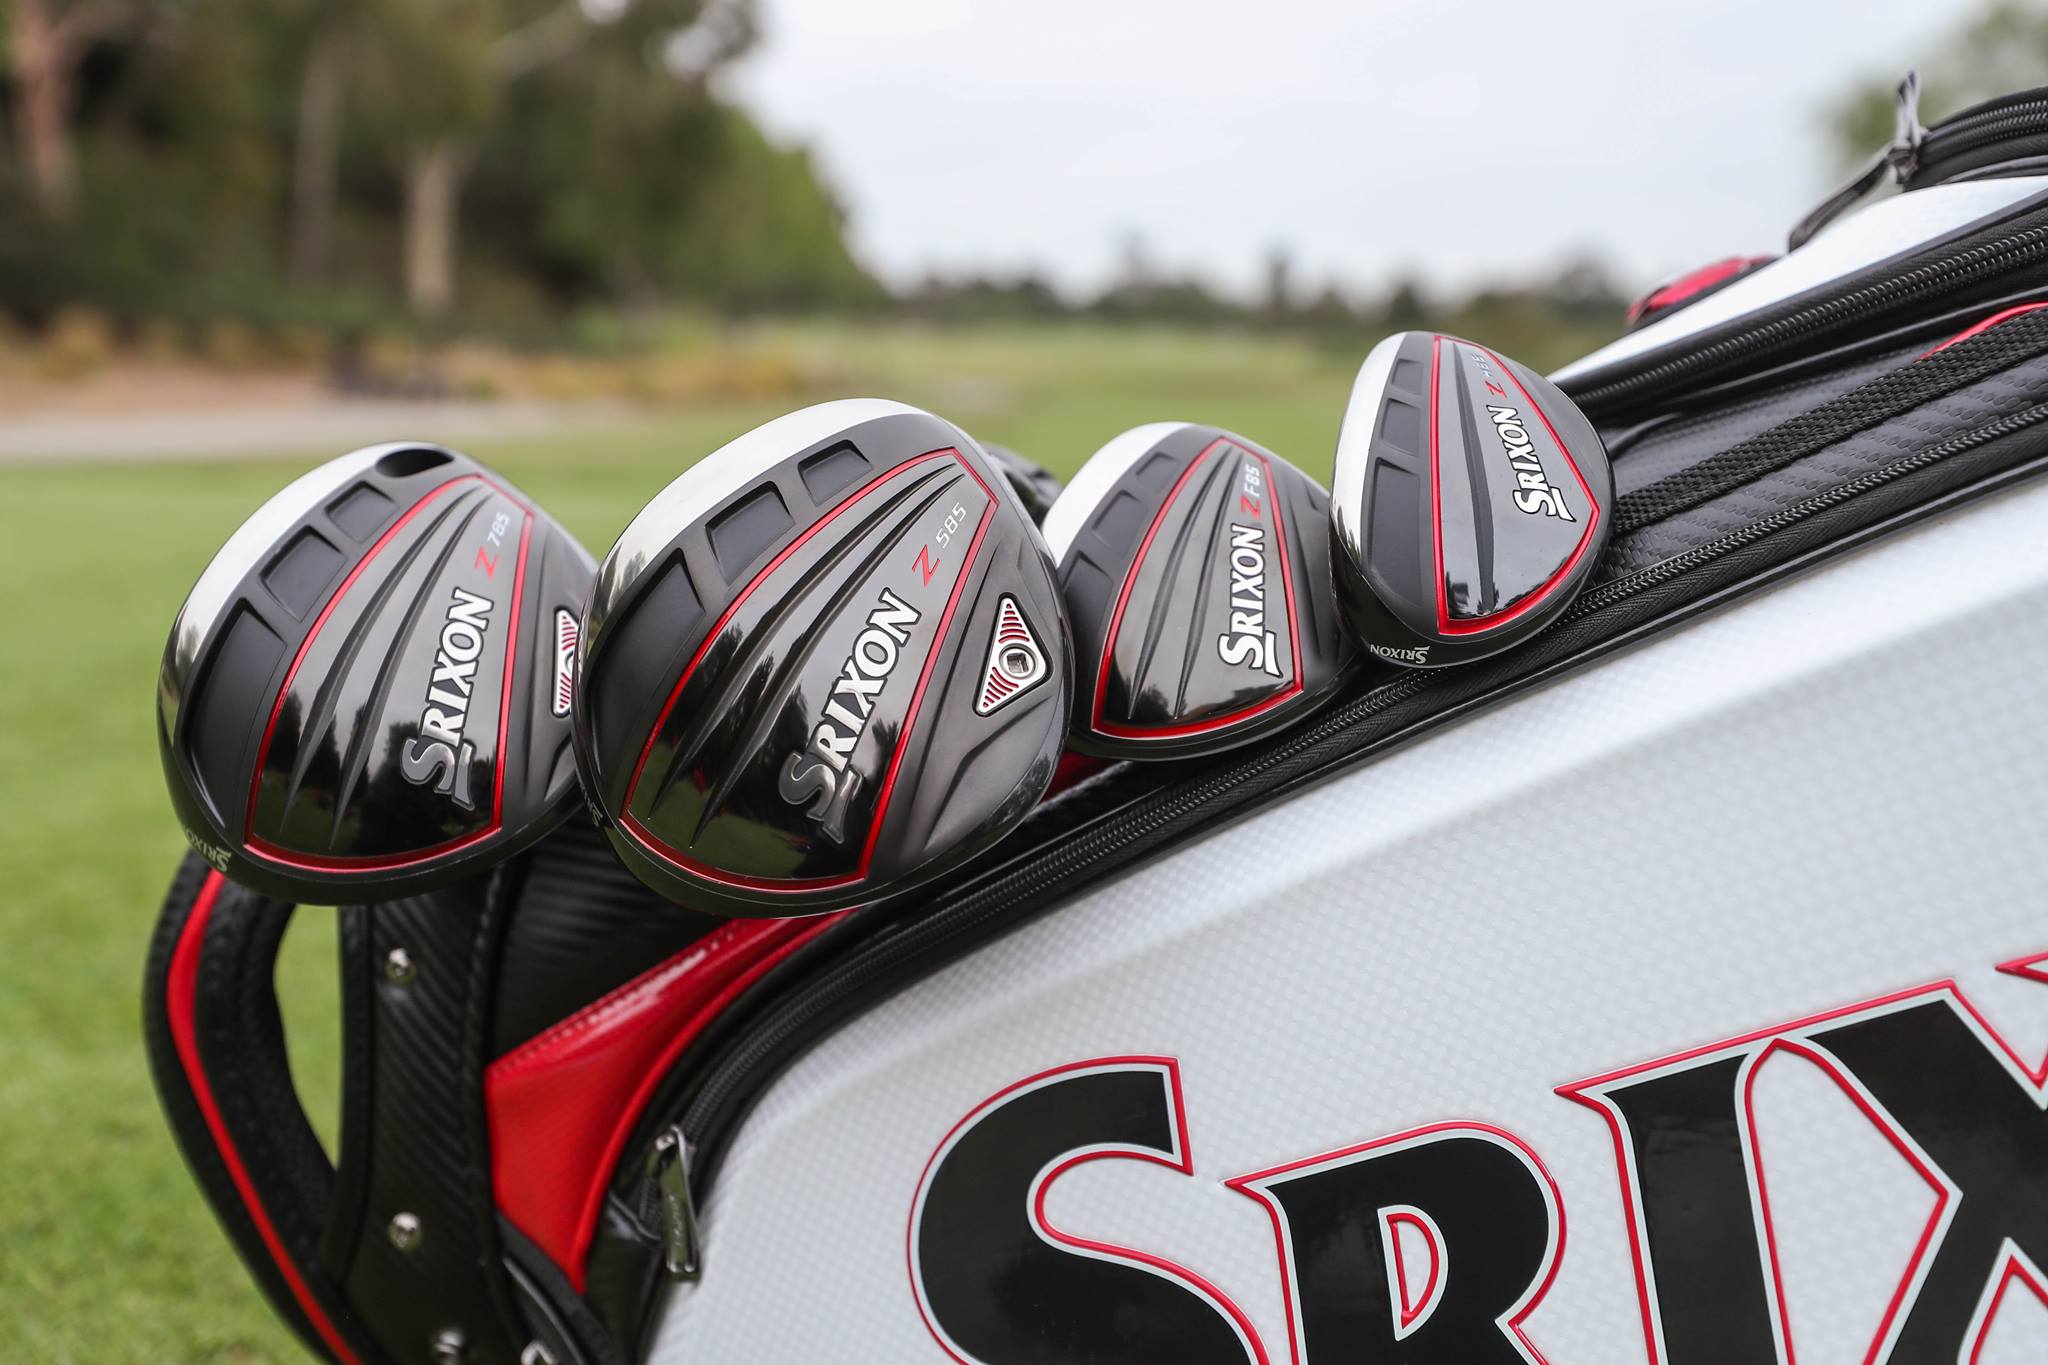 Srixon Golf Demo Day at Cog Hill Golf and Country Club - April